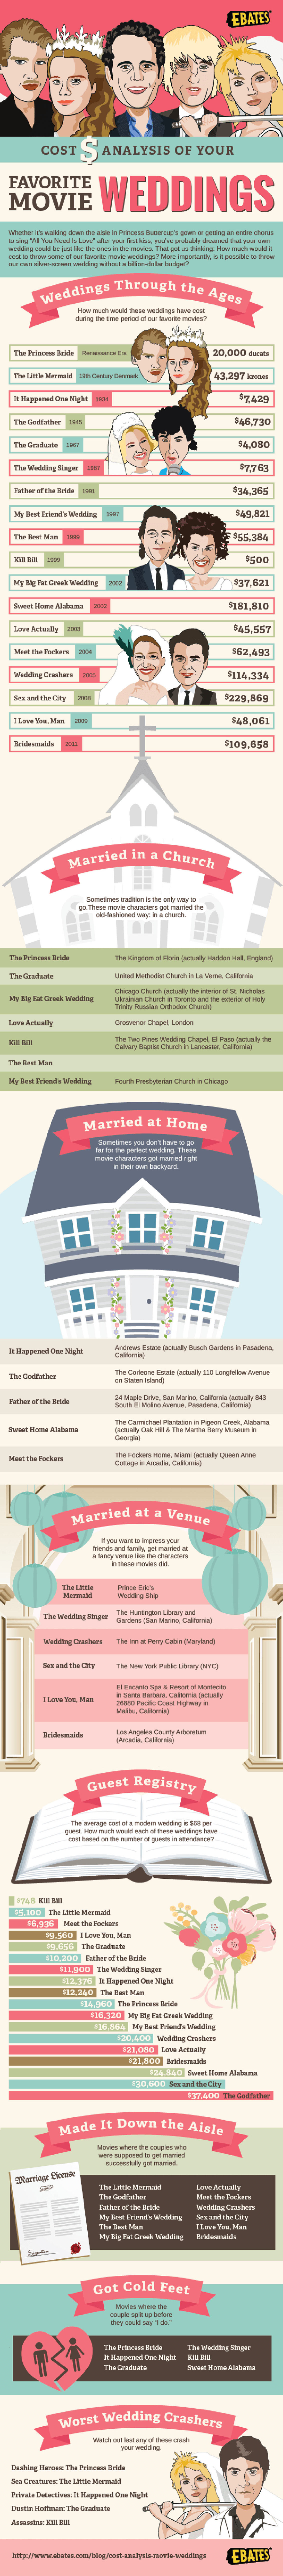 Movie Weddings and Their Actual Costs Infographic